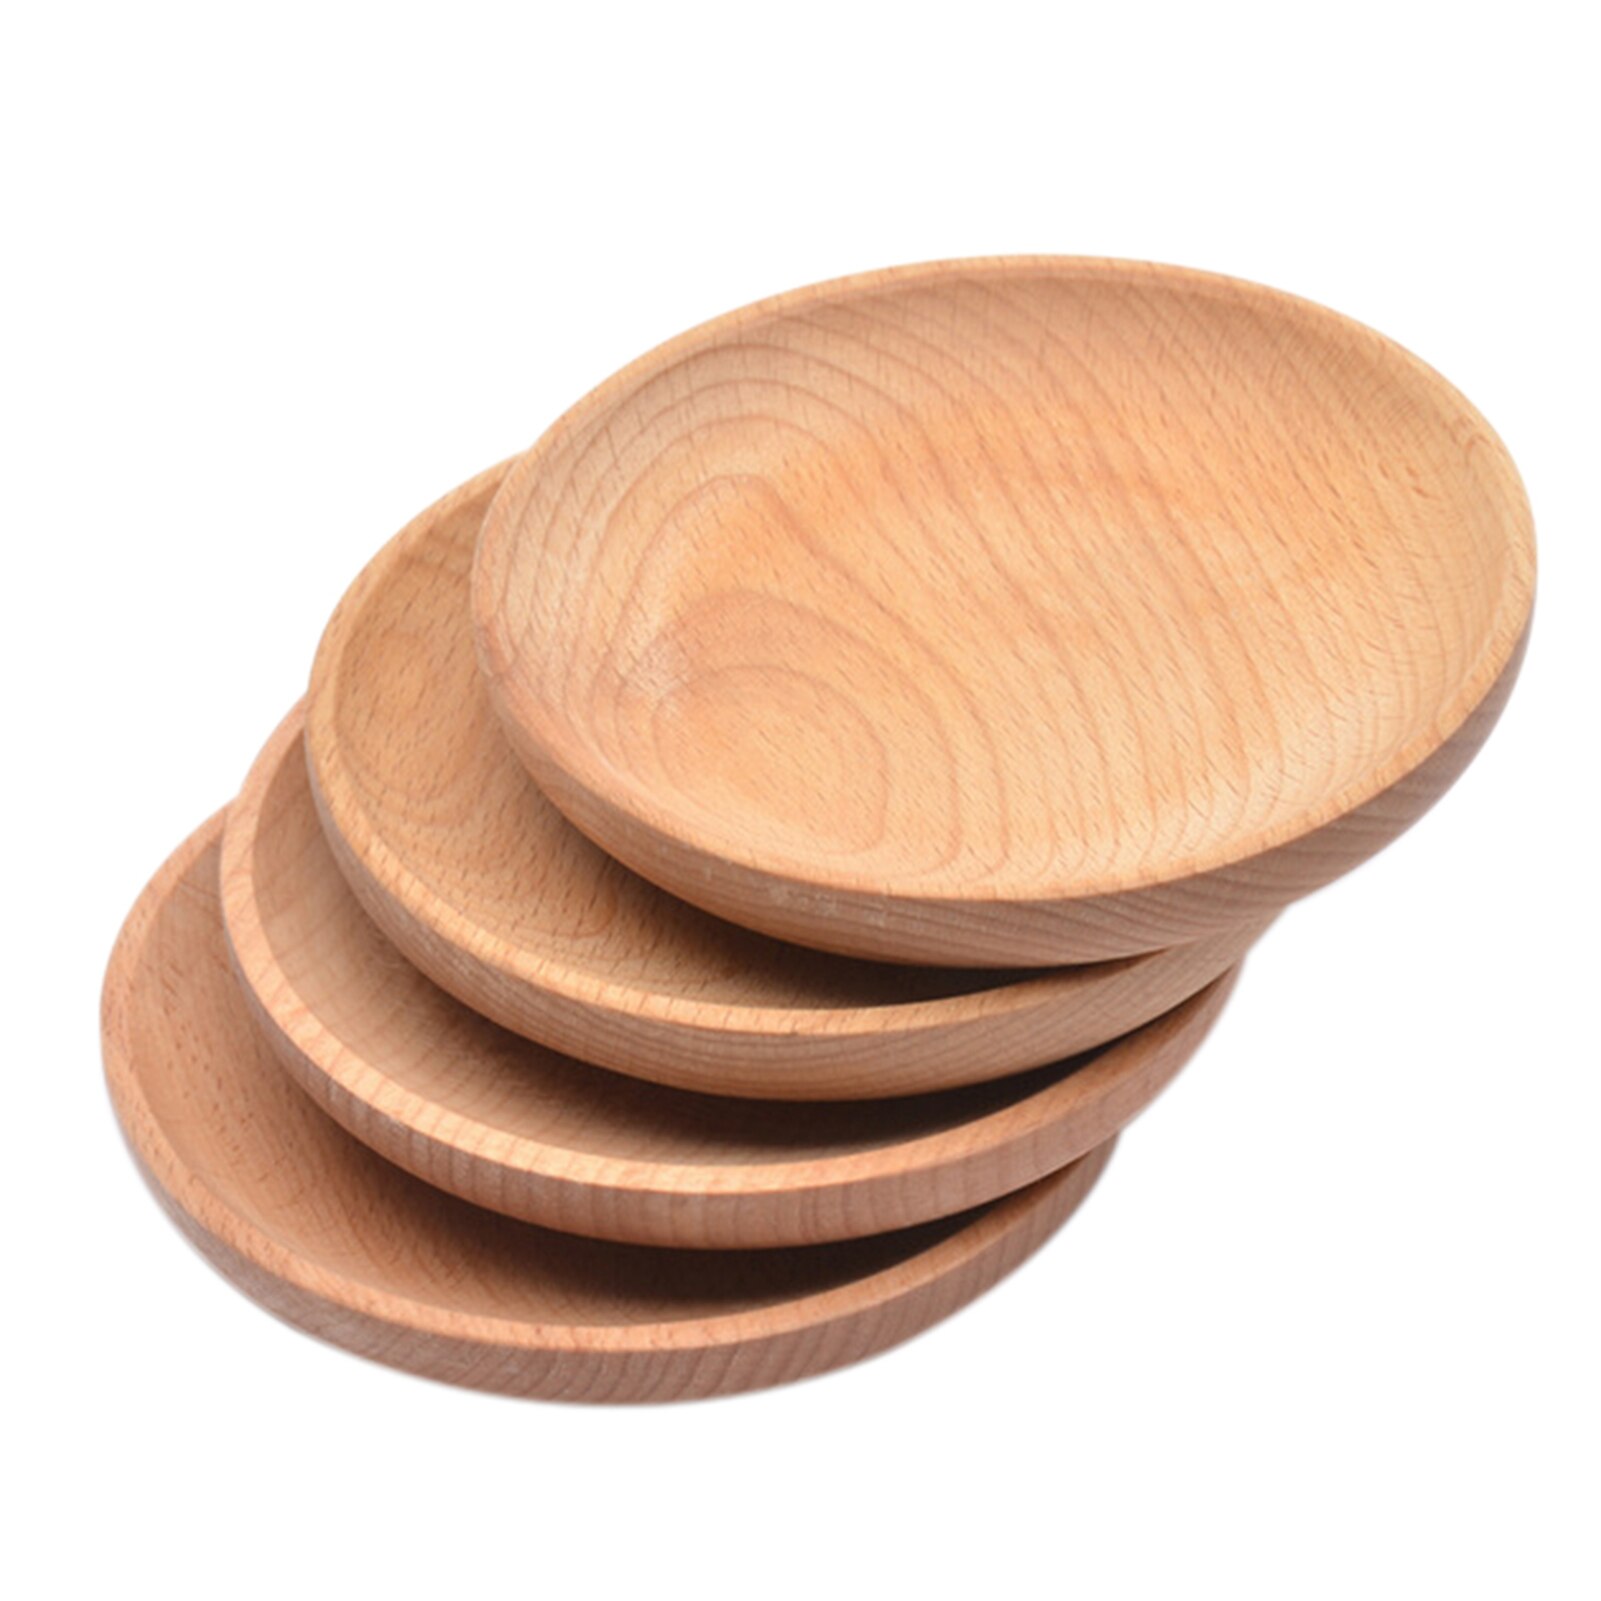 Wood Fruit Plate Living Room Household Cake Solid Wood Plate Dessert Display Table Decoration Kitchen Supplies